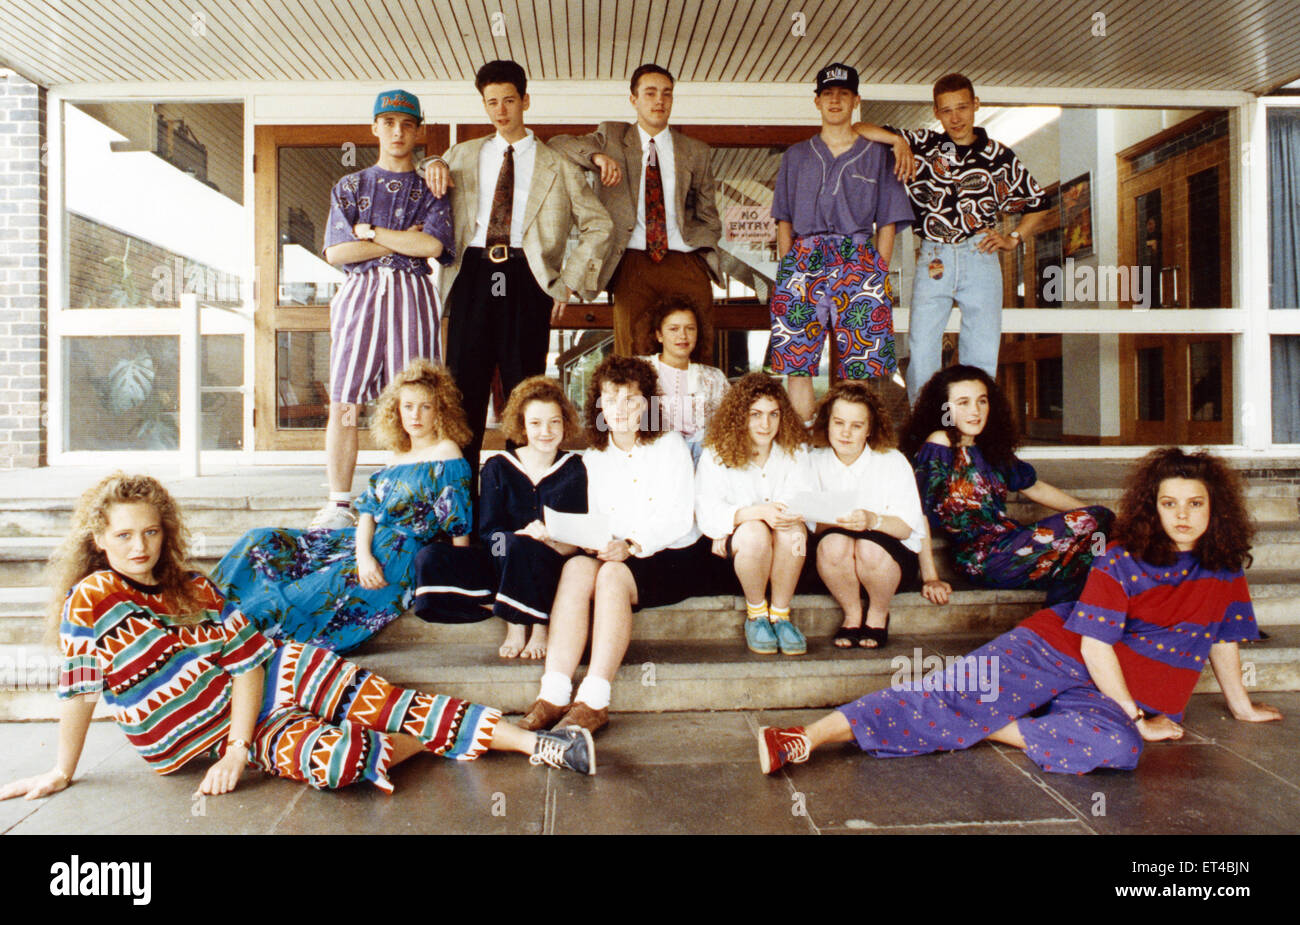 A group of fourth year business studies students at Nunthorpe School organised a fashion show to raise money for charity. Clothes were lent by local stores. Pictured back row L-R Paul Angey, Steven Rooney, Craig Gillespie, Andrew Prest and Paul Walker. Middle row - Rachel Puckett, Louise Naden, Claire Painter, Claire Naden, Susan Pryse, Debbie Crinnian. Front - Linzie Tonner, Jayne Stephenson. 10th May 1990. Stock Photo